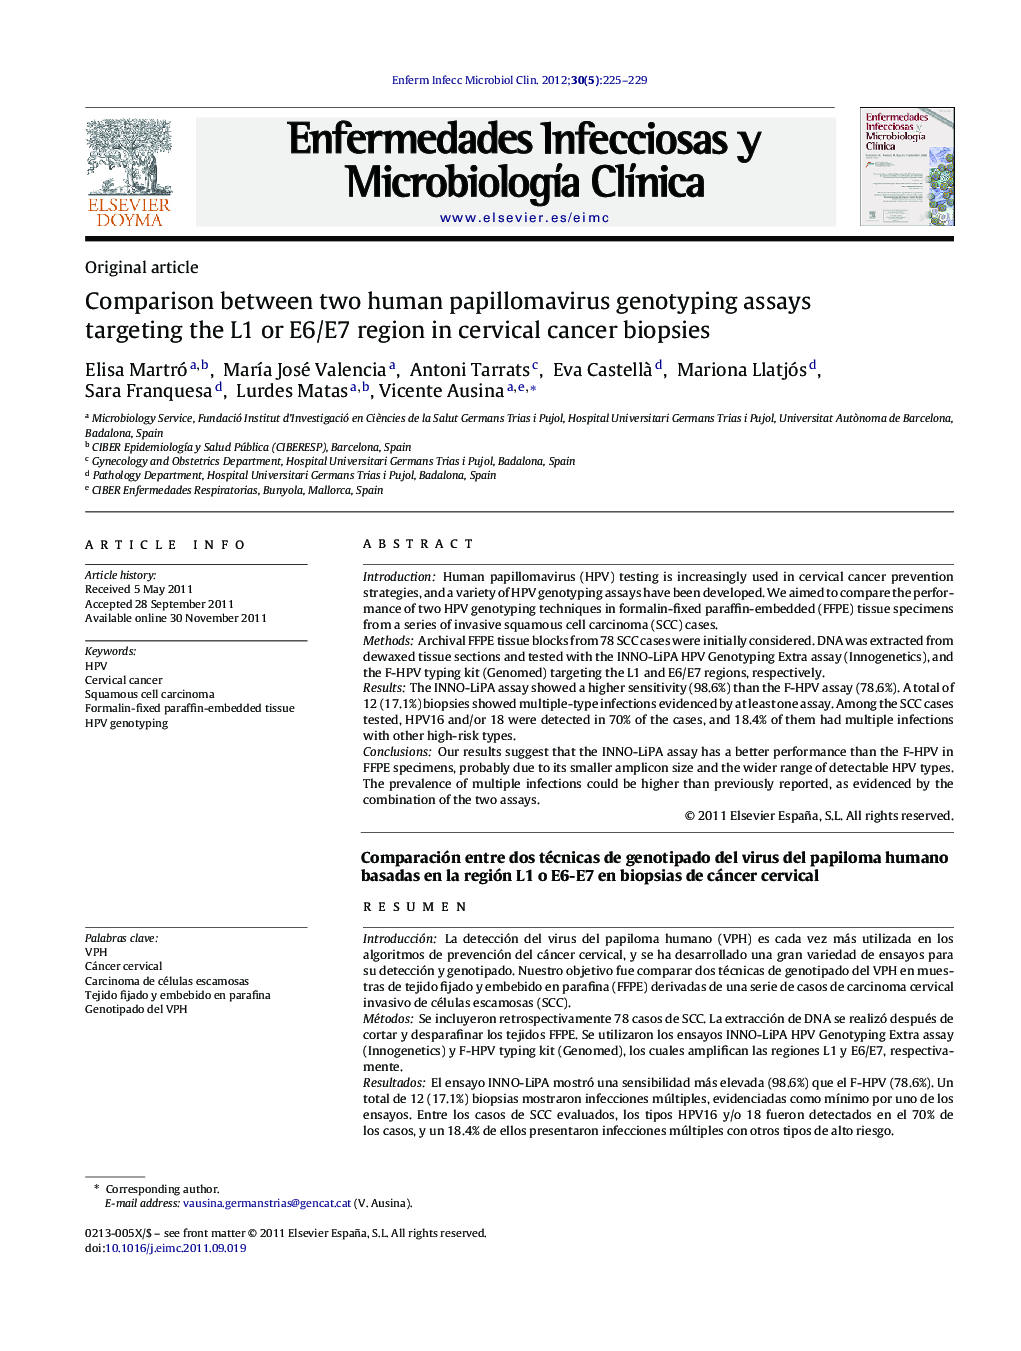 Comparison between two human papillomavirus genotyping assays targeting the L1 or E6/E7 region in cervical cancer biopsies